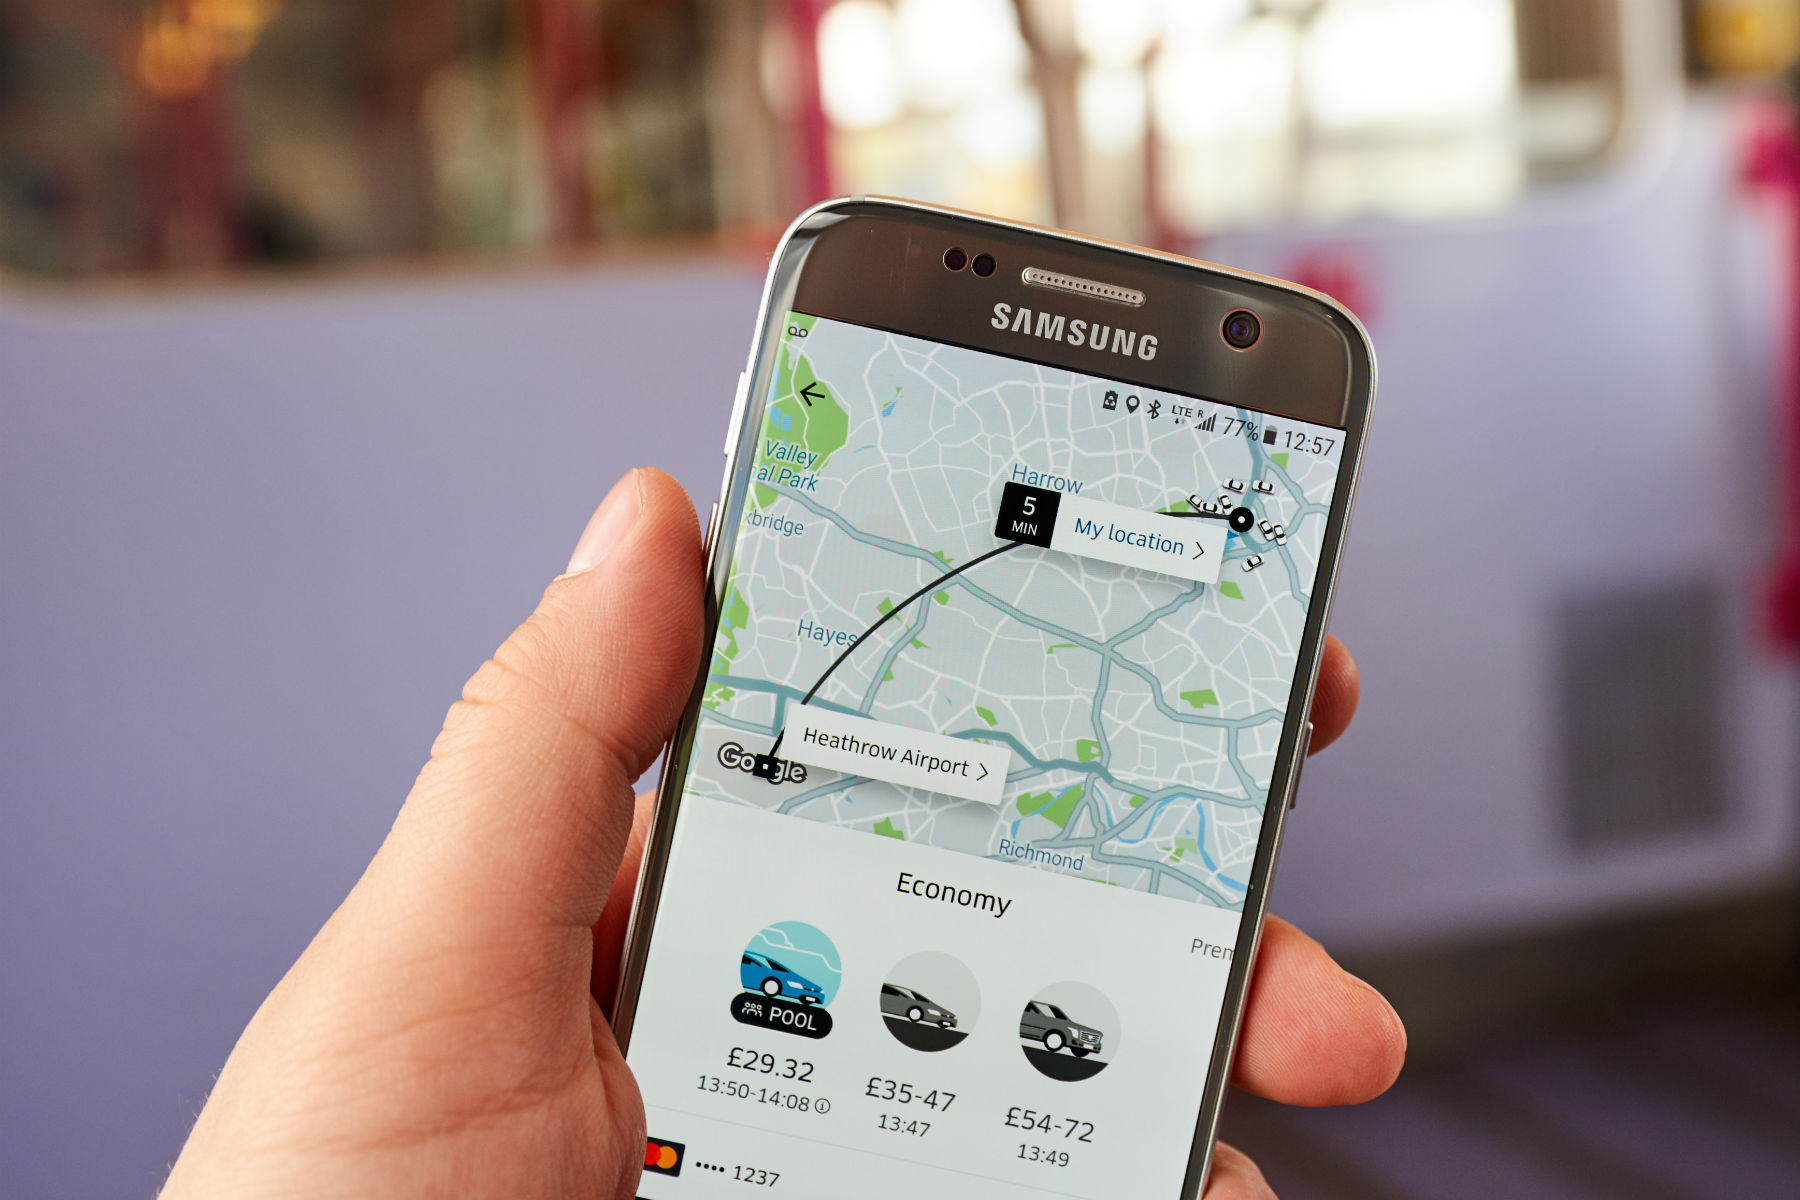 Uber is 'not fit and proper' to operate in London